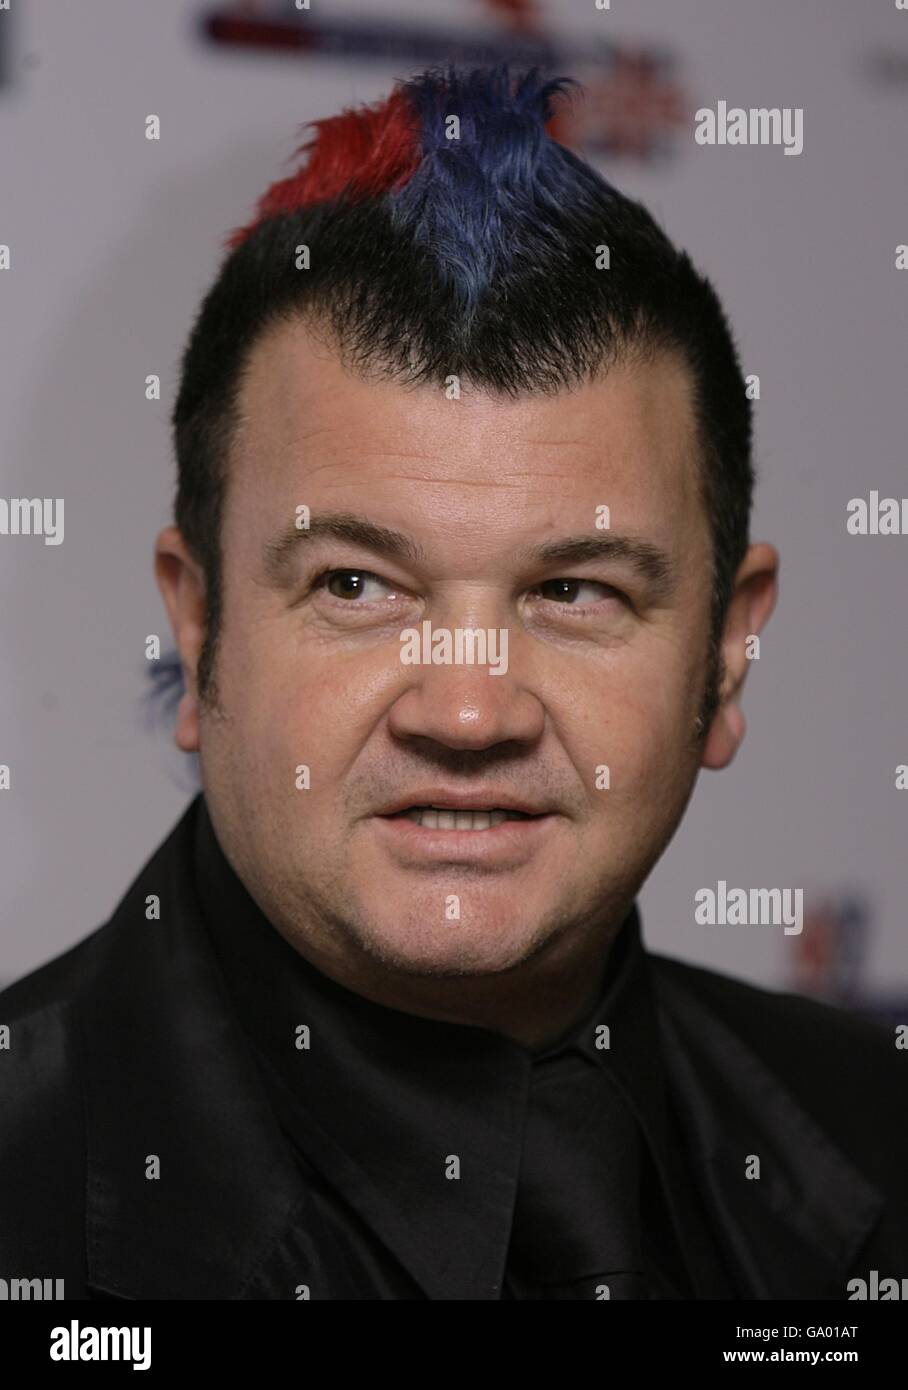 Australian paparazzo and media personality Darren Lyons arrives for the Miss Great Britain 2007 ceremony, at the Grosvenor House Hotel in cental London. Picture date: Monday 21 May 2007. Photo credit should read: Yui Mok/PA Wire Stock Photo